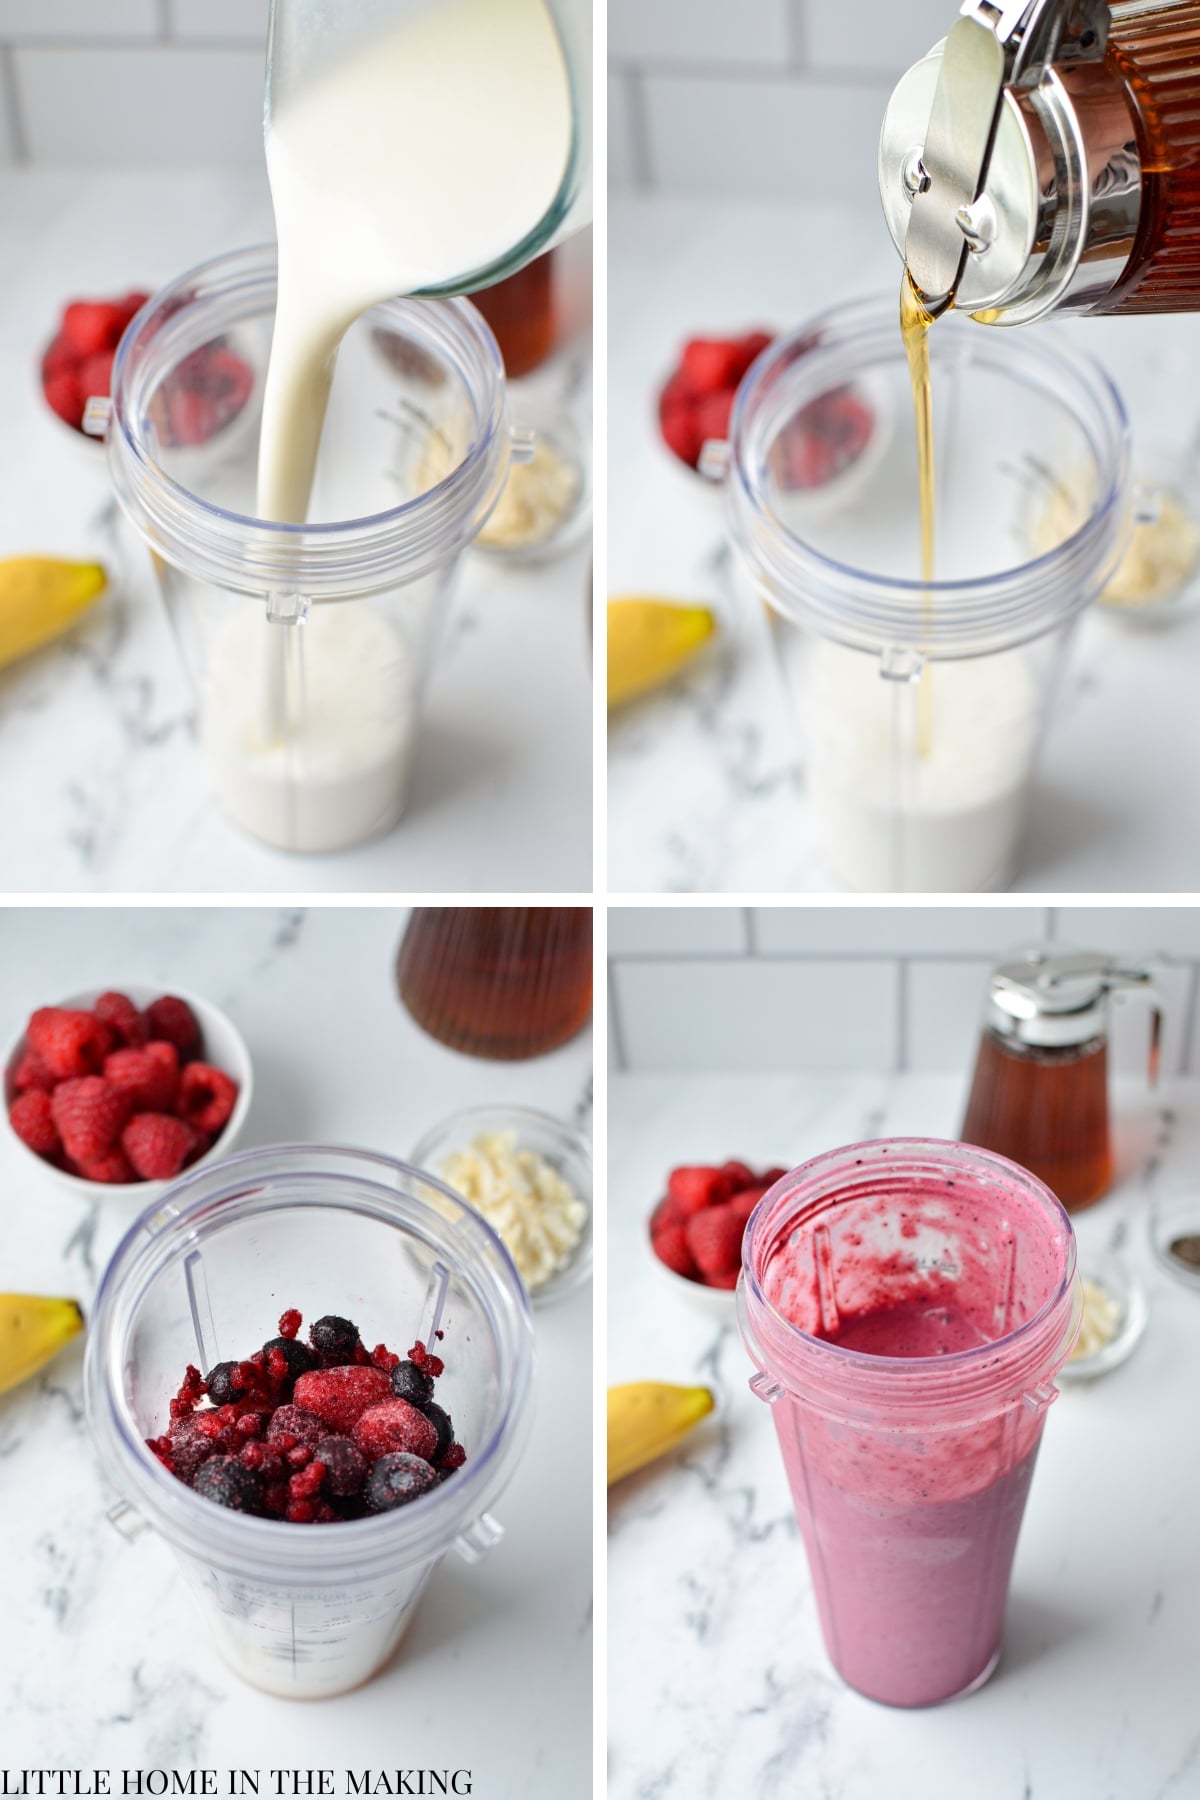 Adding kefir, maple syrup, and fruit to a blender cup.